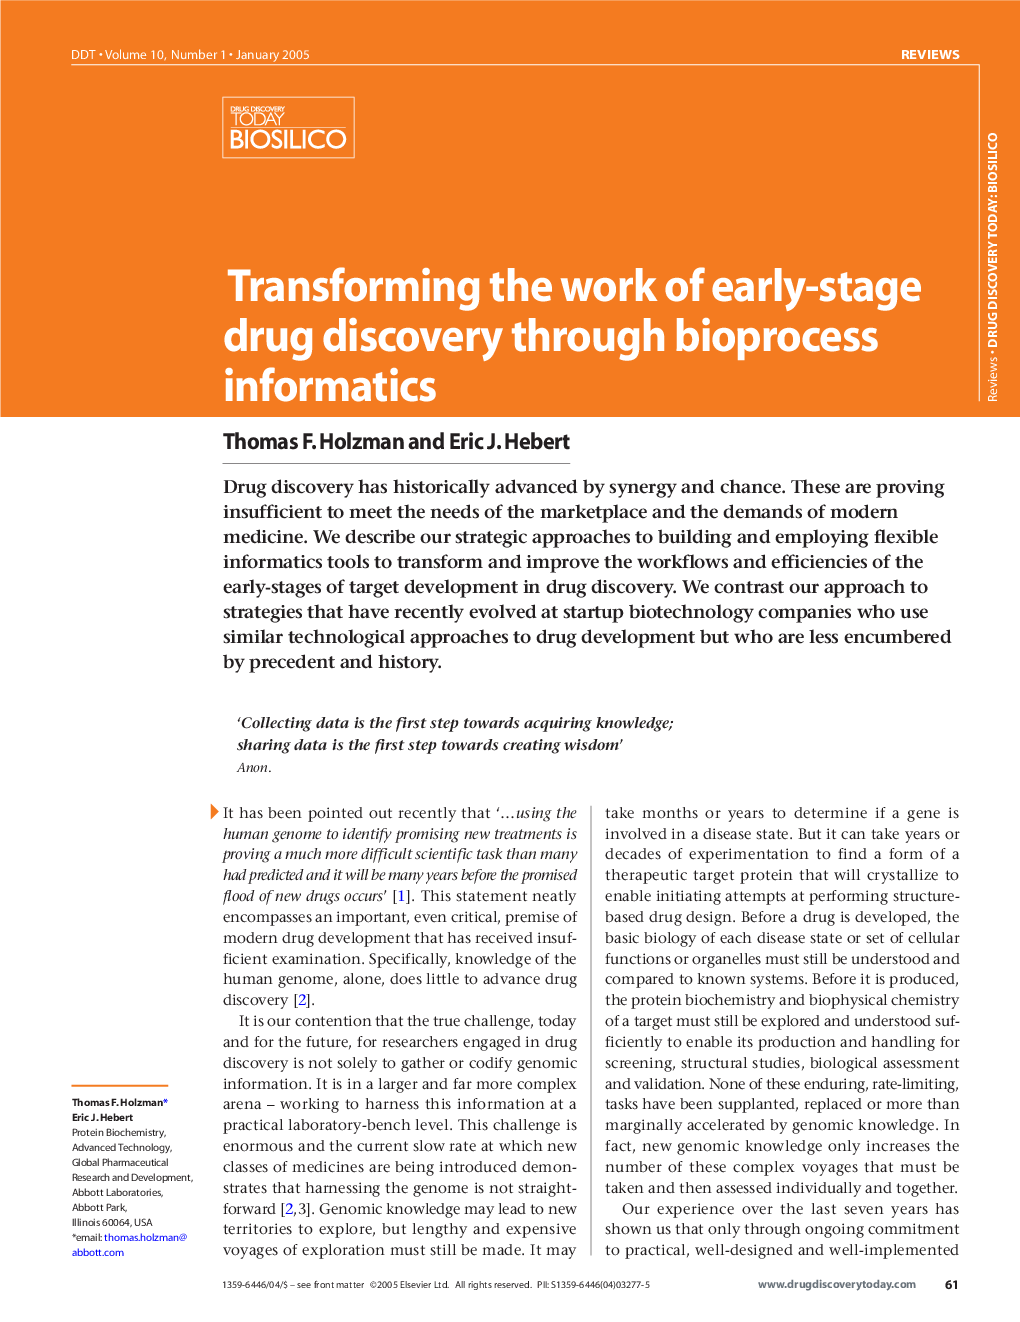 Transforming the work of early-stage drug discovery through bioprocess informatics